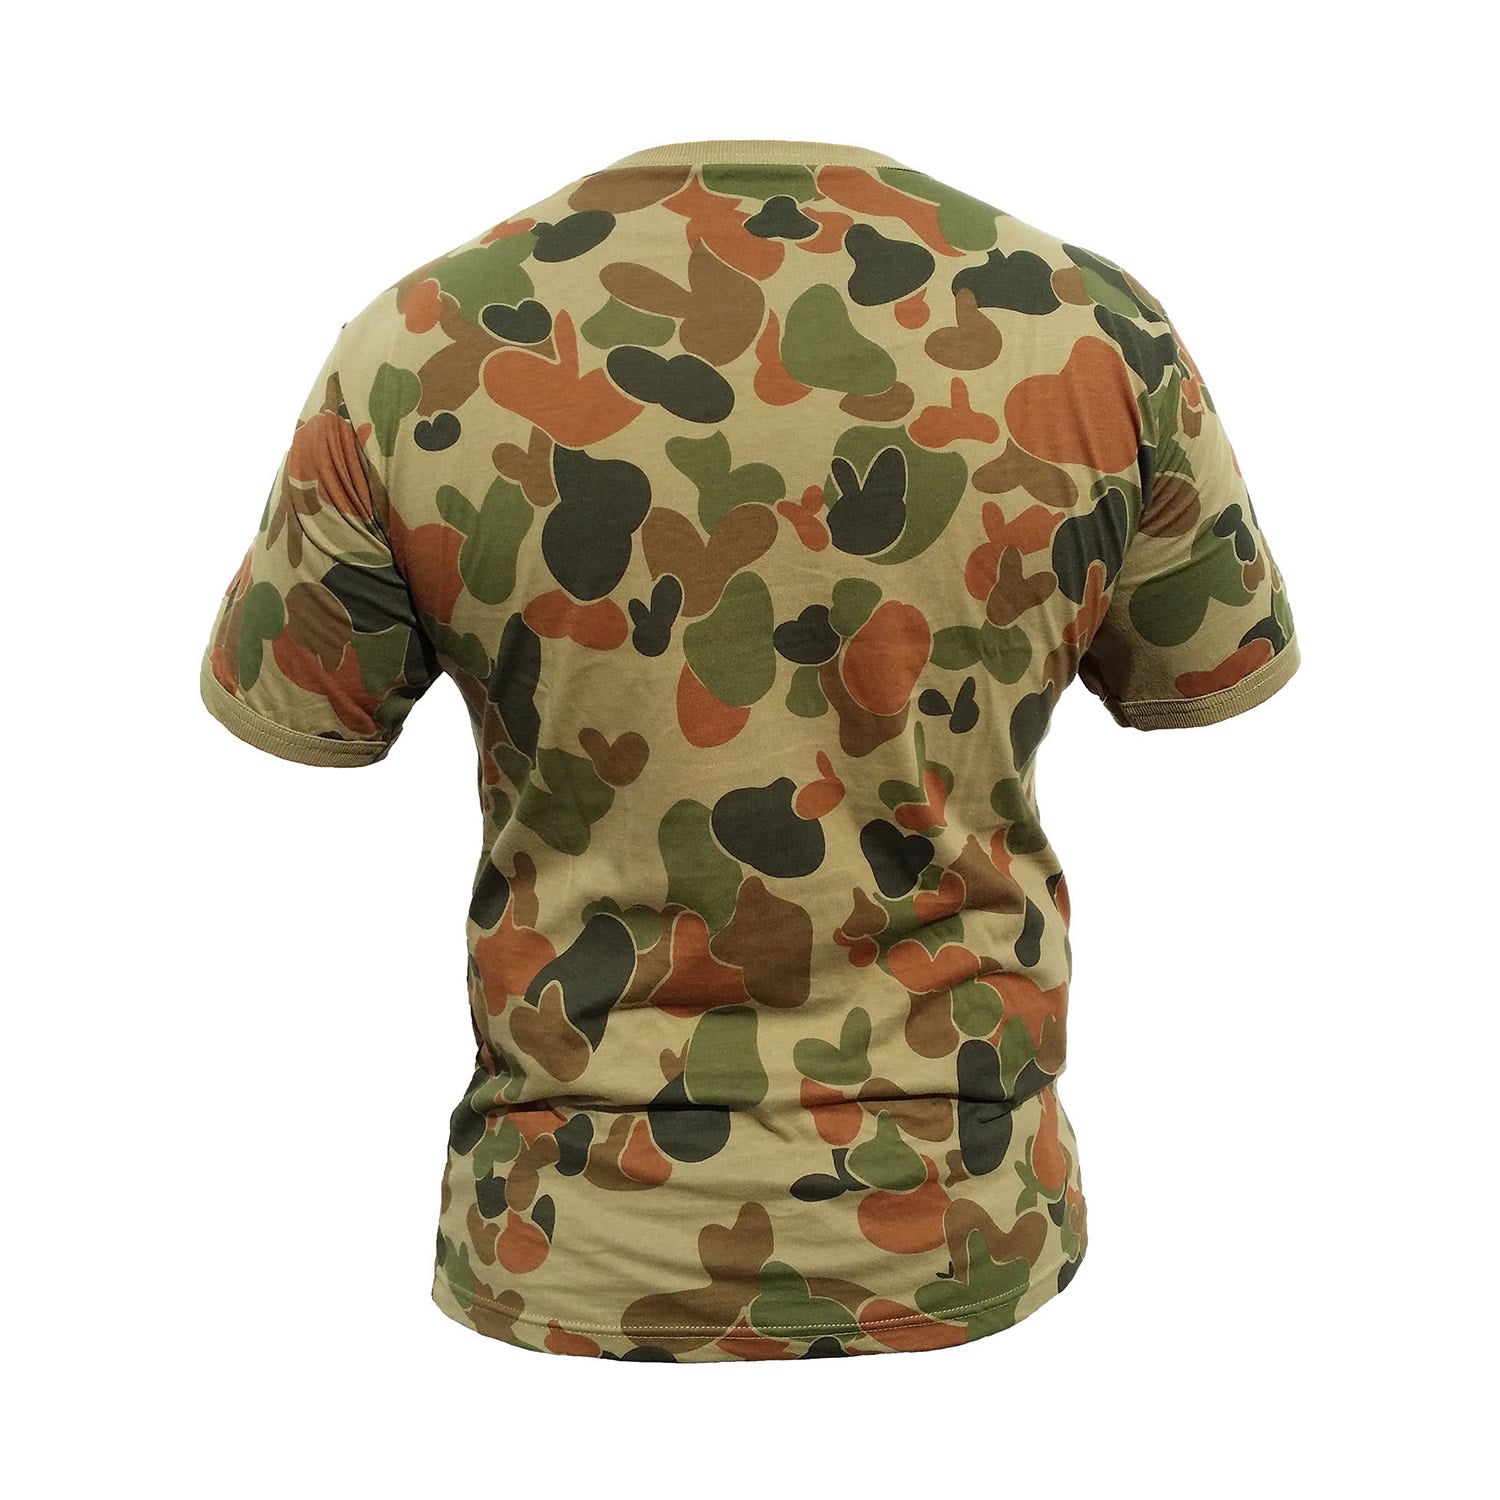 The TAS Cotton T-Shirt is made to military specifications, featuring 180gsm Auscam pure cotton with raglan sleeves and a round neck.  This t-shirt is perfect for military use, camping, hiking and other activities